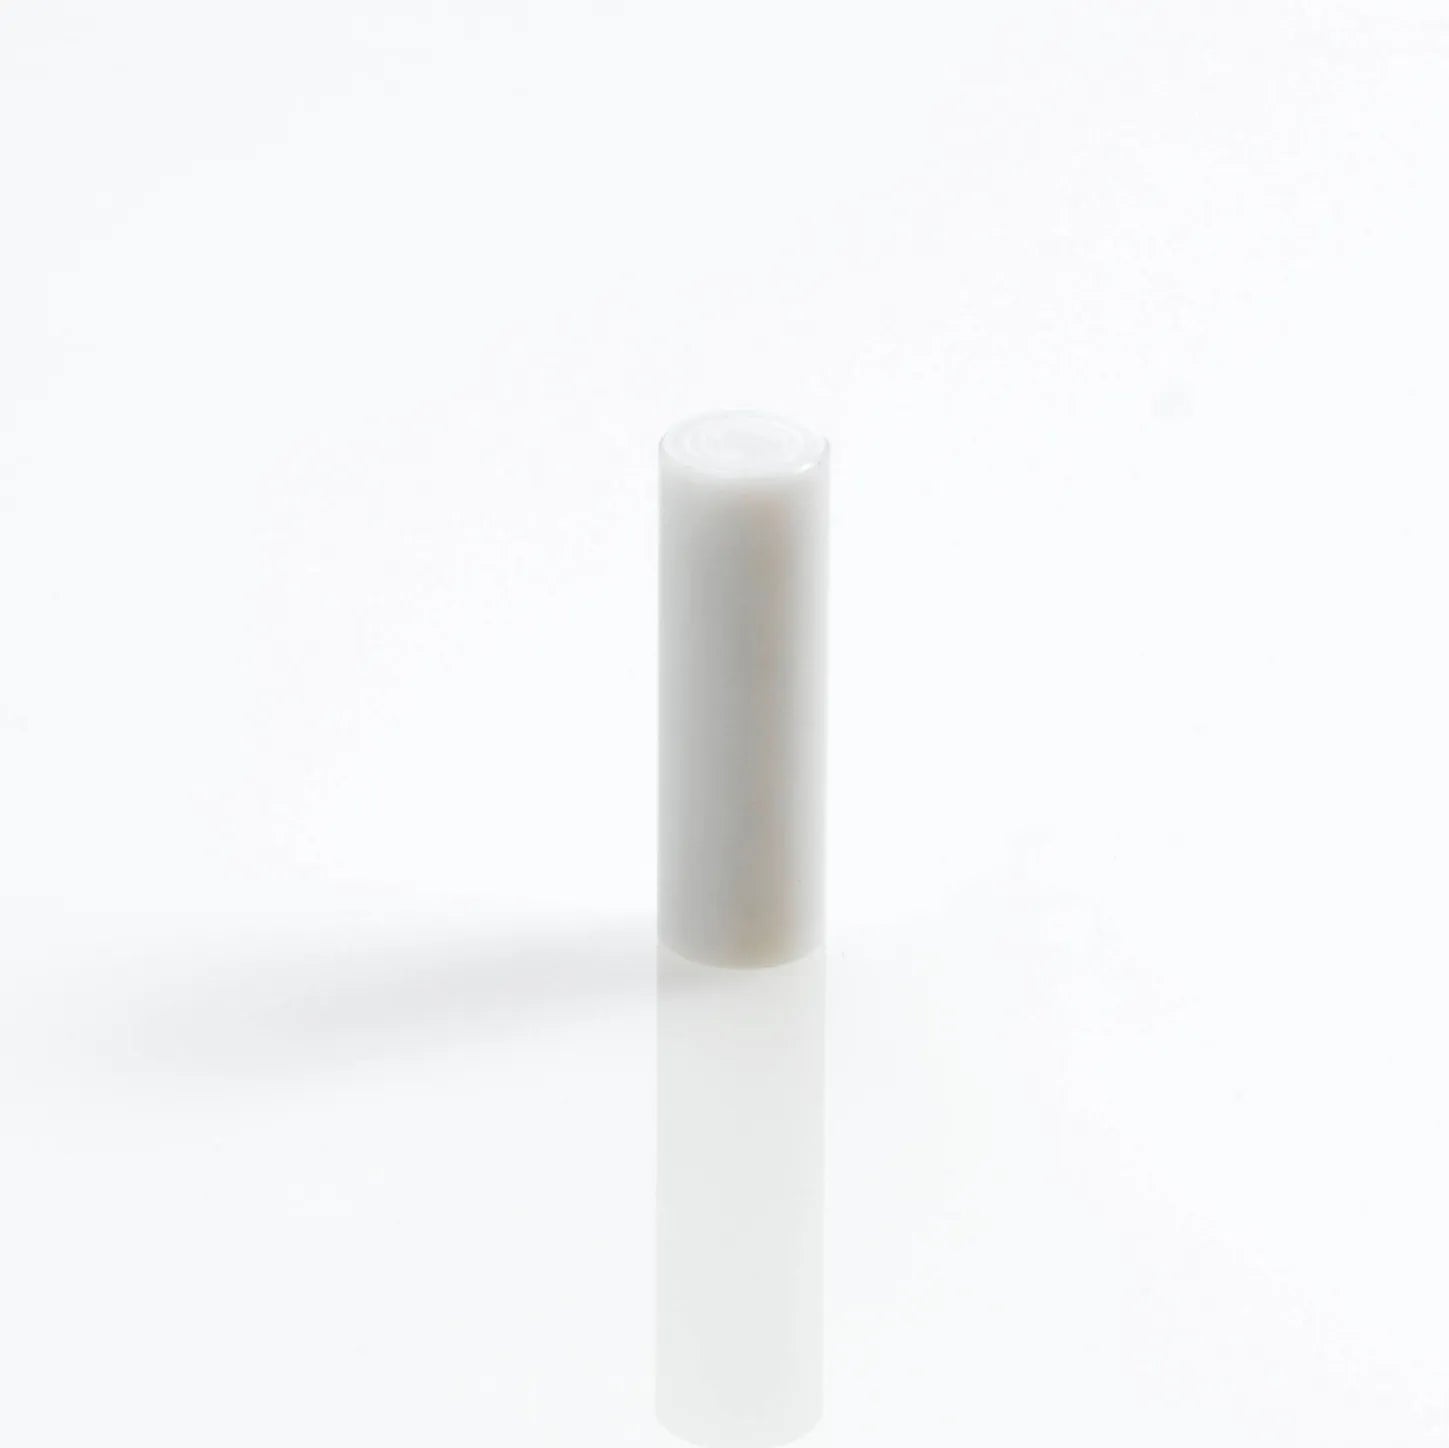 Syringe Seal, 250µL/2500µL, Comparable to Waters # WAT077347